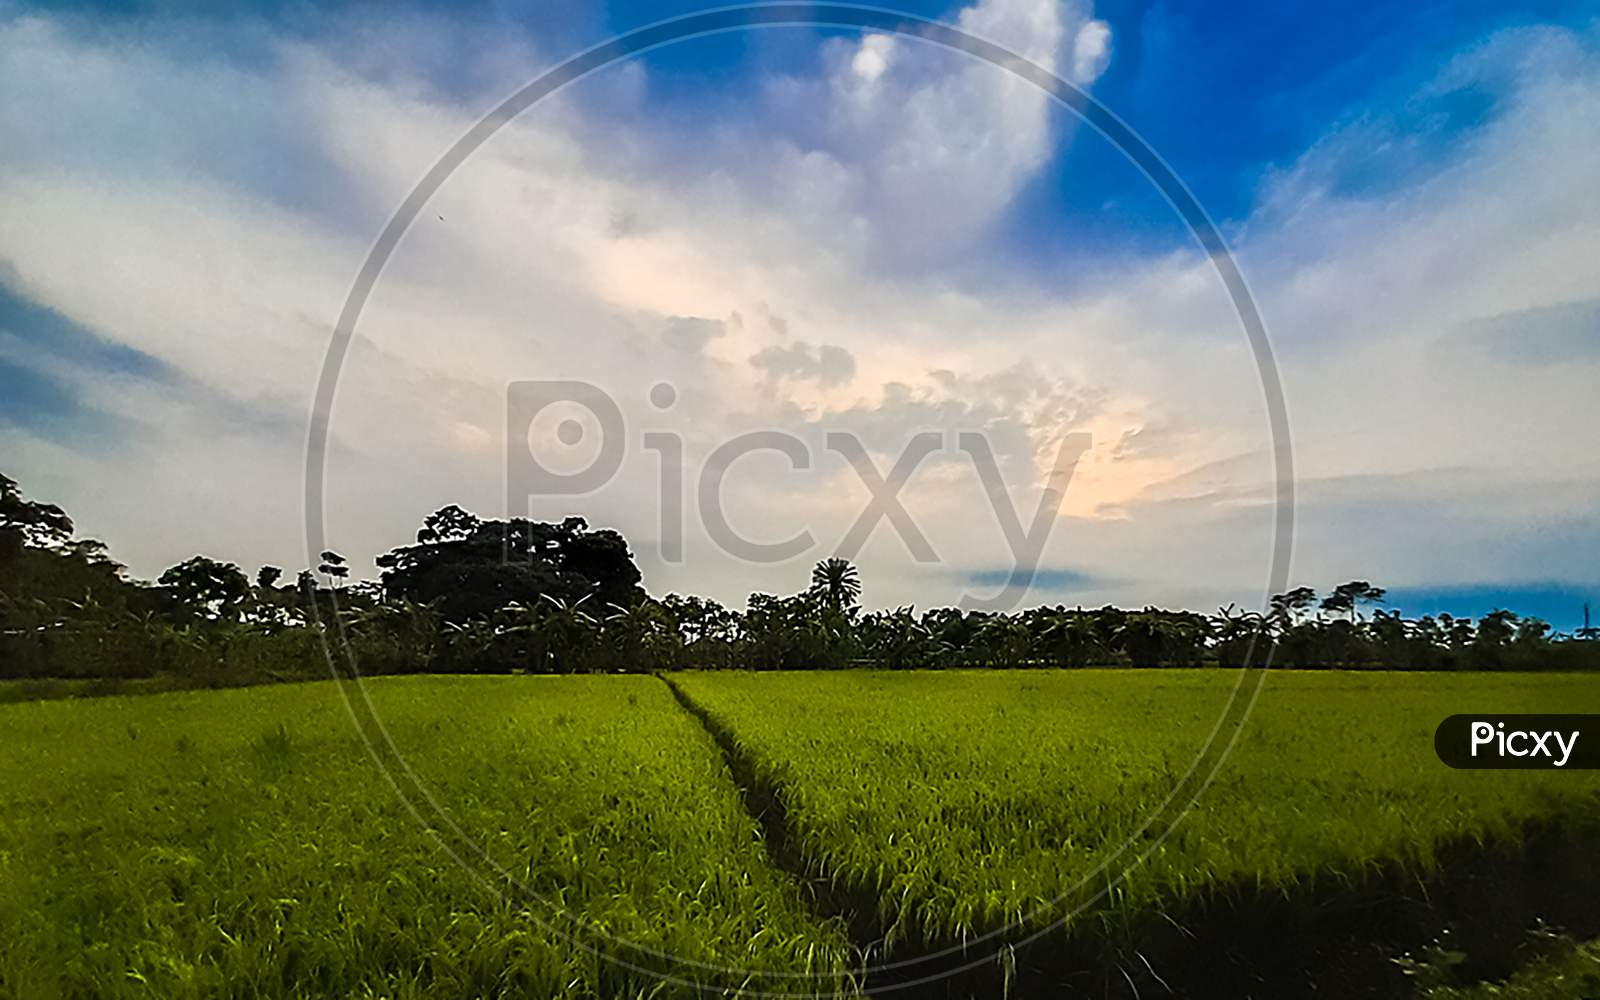 Indian Village Agriculture Green Paddy Land And Blue Sky With White Clouds.